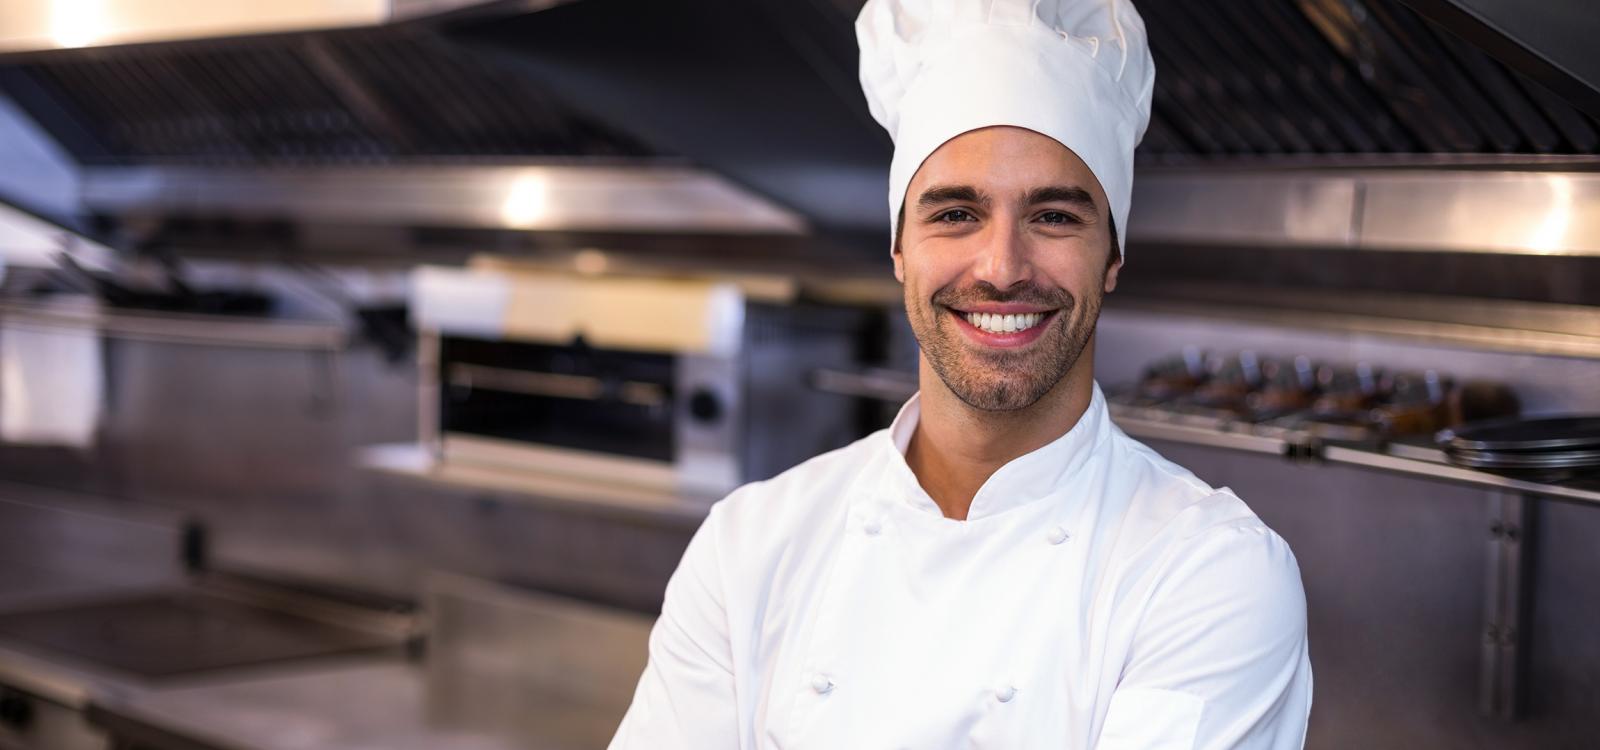 Ideal Chef Smile